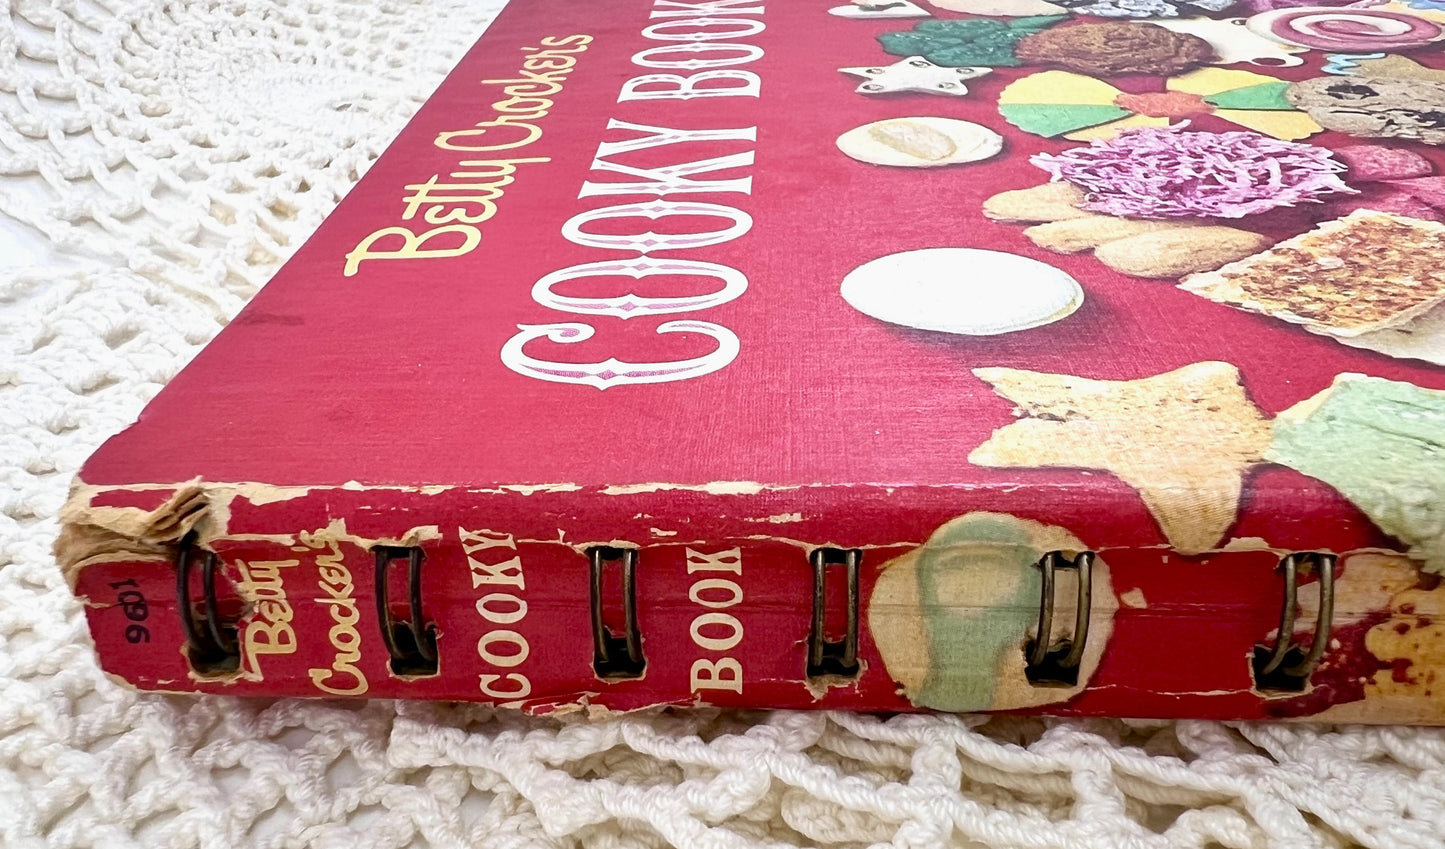 Betty Crocker's Cooky Book, 1st Edition, 2nd Printing, 1963